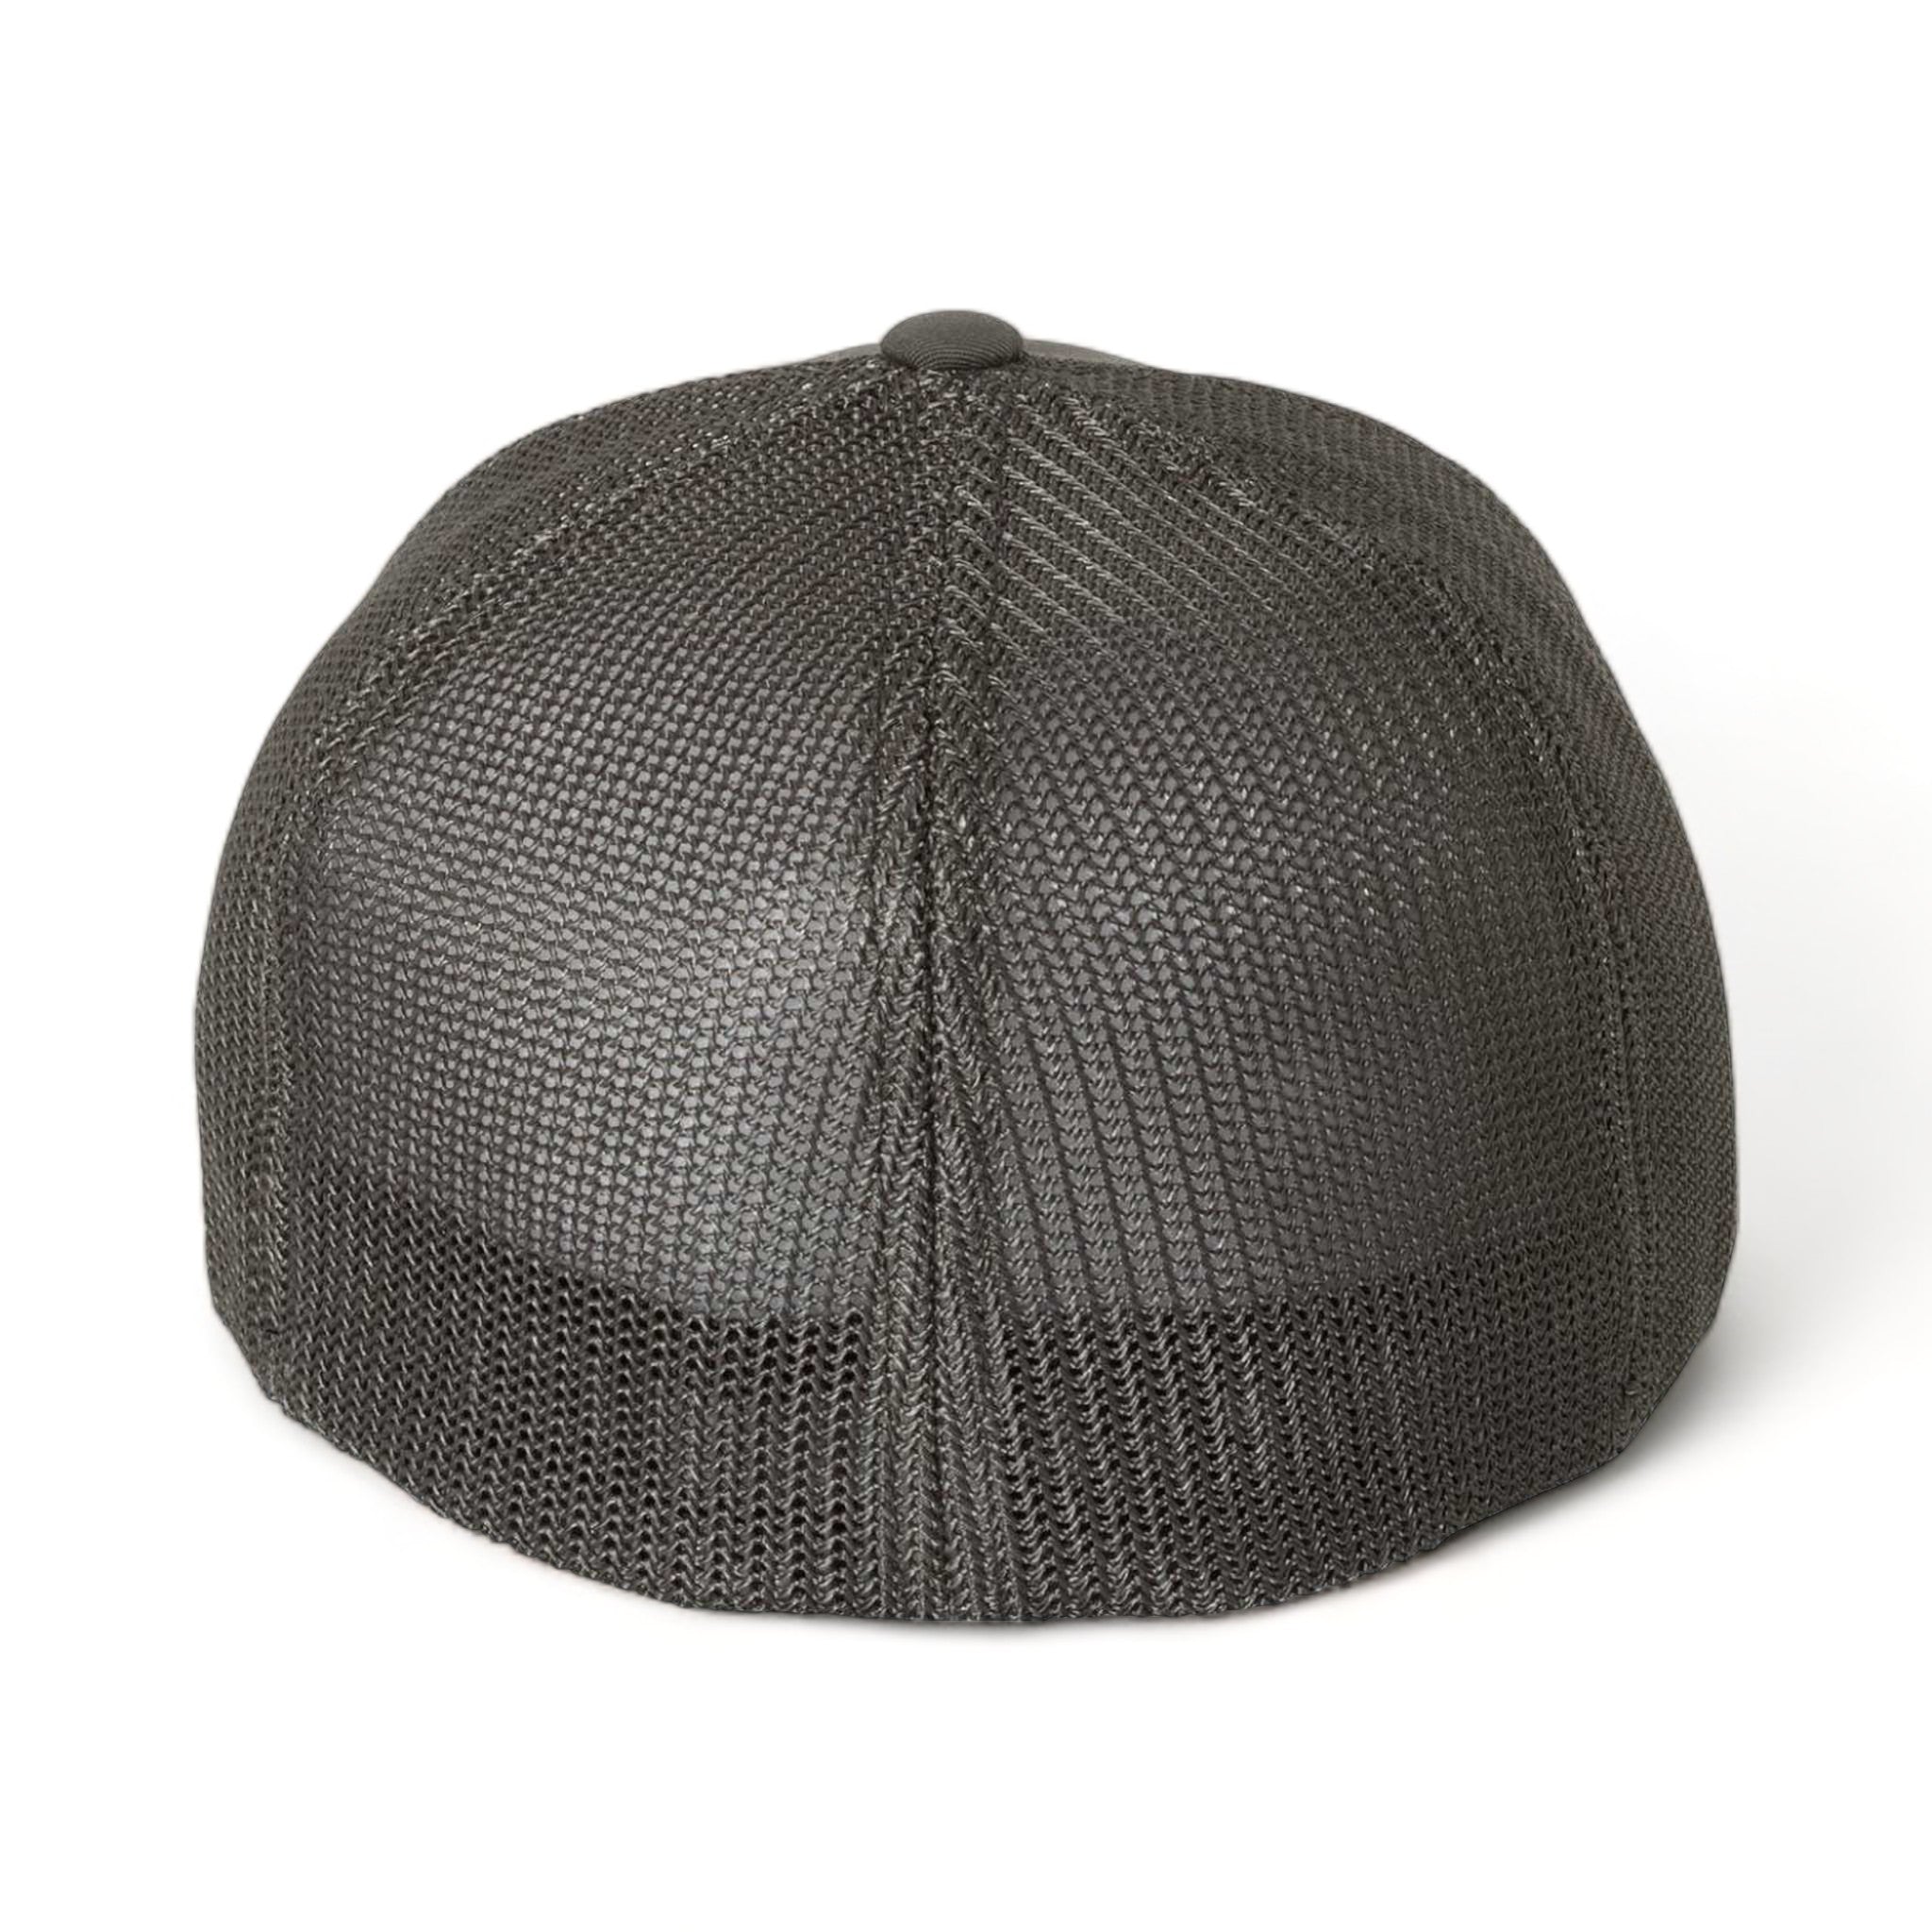 Back view of Flexfit 6511 custom hat in charcoal